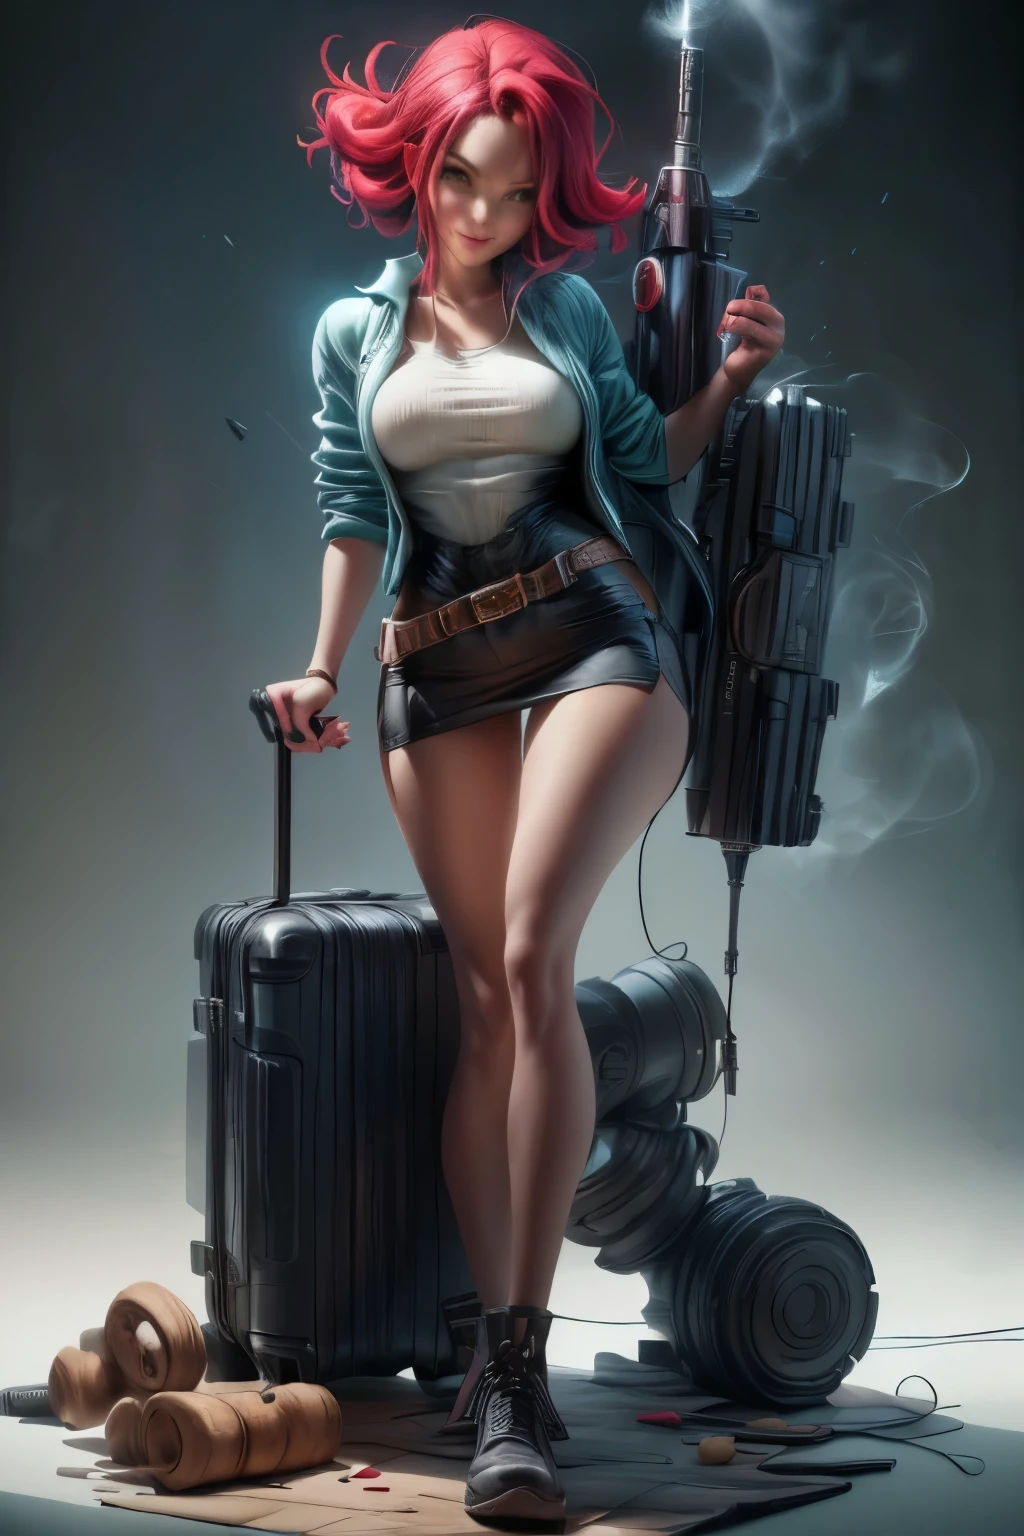 ((Long Shot:1.6)), Unreal Engine:1.4, Ultra-Real CG K, Realistic:1.4, Skin Texture:1.4, ((Artwork 1 Young woman full body:1.5)), ((red hair green eyes, Full lips and a sensual smile:1.5)), Shaved side punk hairstyle, Tattoo, Gatling Gun, box, Looking at the audience, Dynamic pose, blow, Ammunition belt, gloves, big breasts, Shootout, Very detailed:1.4, More detailed, Optical Mix, playful pattern, Animated textures, Unique visual effects, pink leather miniskirt, pink jacket, masterpiece, Background Ruins and scrap metal, ((color, cyan, green, pink, 茶color : 1.2)), ((8K Realistic Digital Art.)), 32k